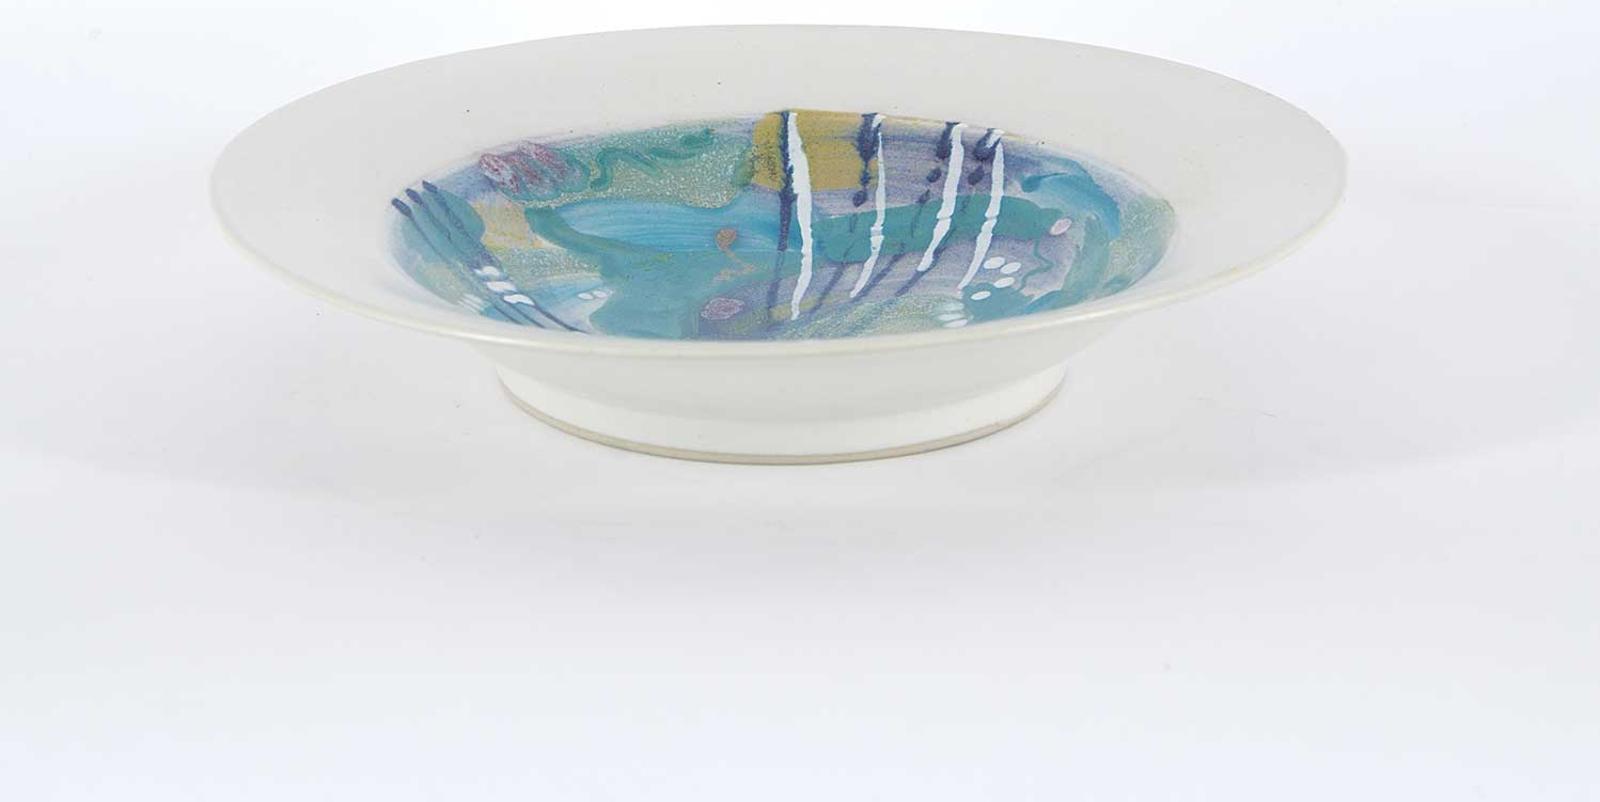 Don Wells (1938) - Untitled - Colourful Bowl